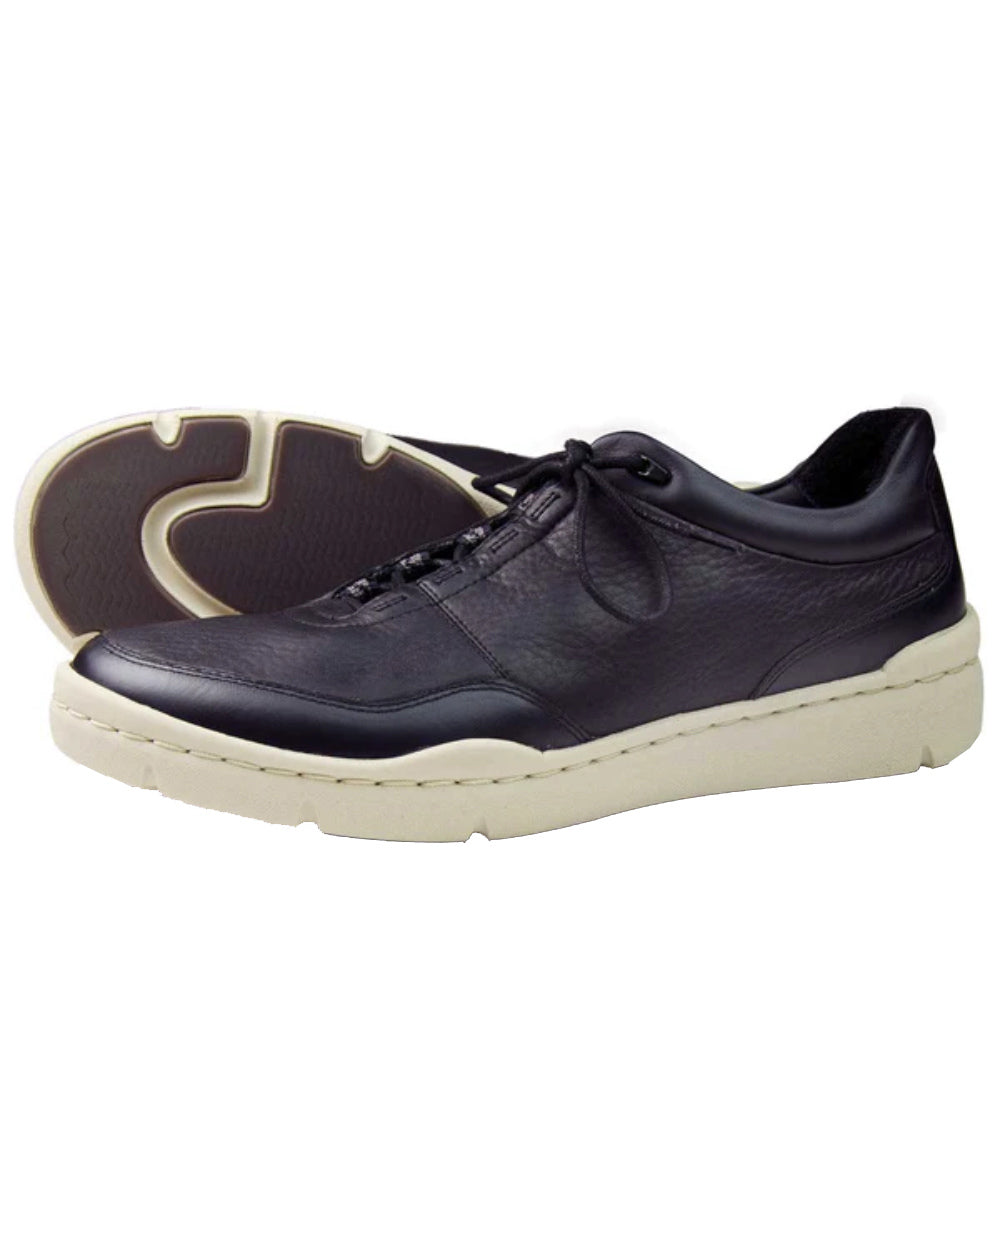 Black Coloured Orca Bay Mens Camden Shoes On A White Background 